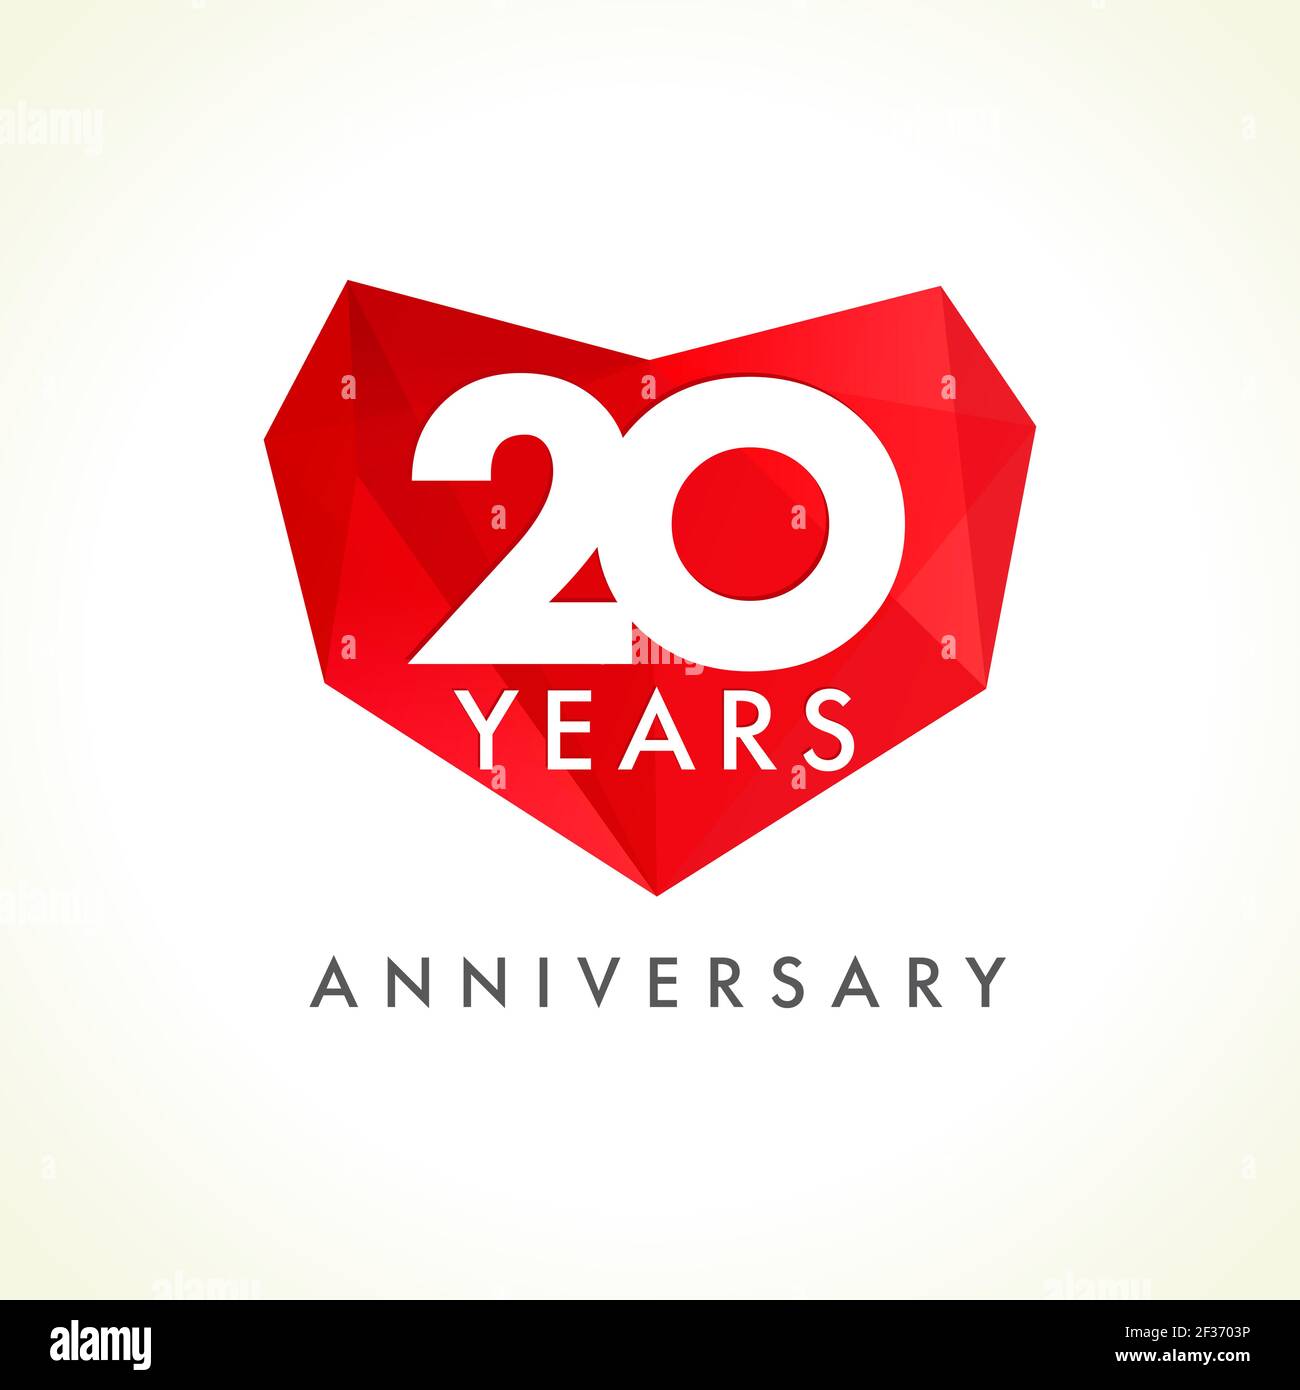 Anniversary 20 years old hearts celebrating vector logo. Birthday greetings with stained-glass heart shape. Holiday abstract lovely stained card with Stock Vector